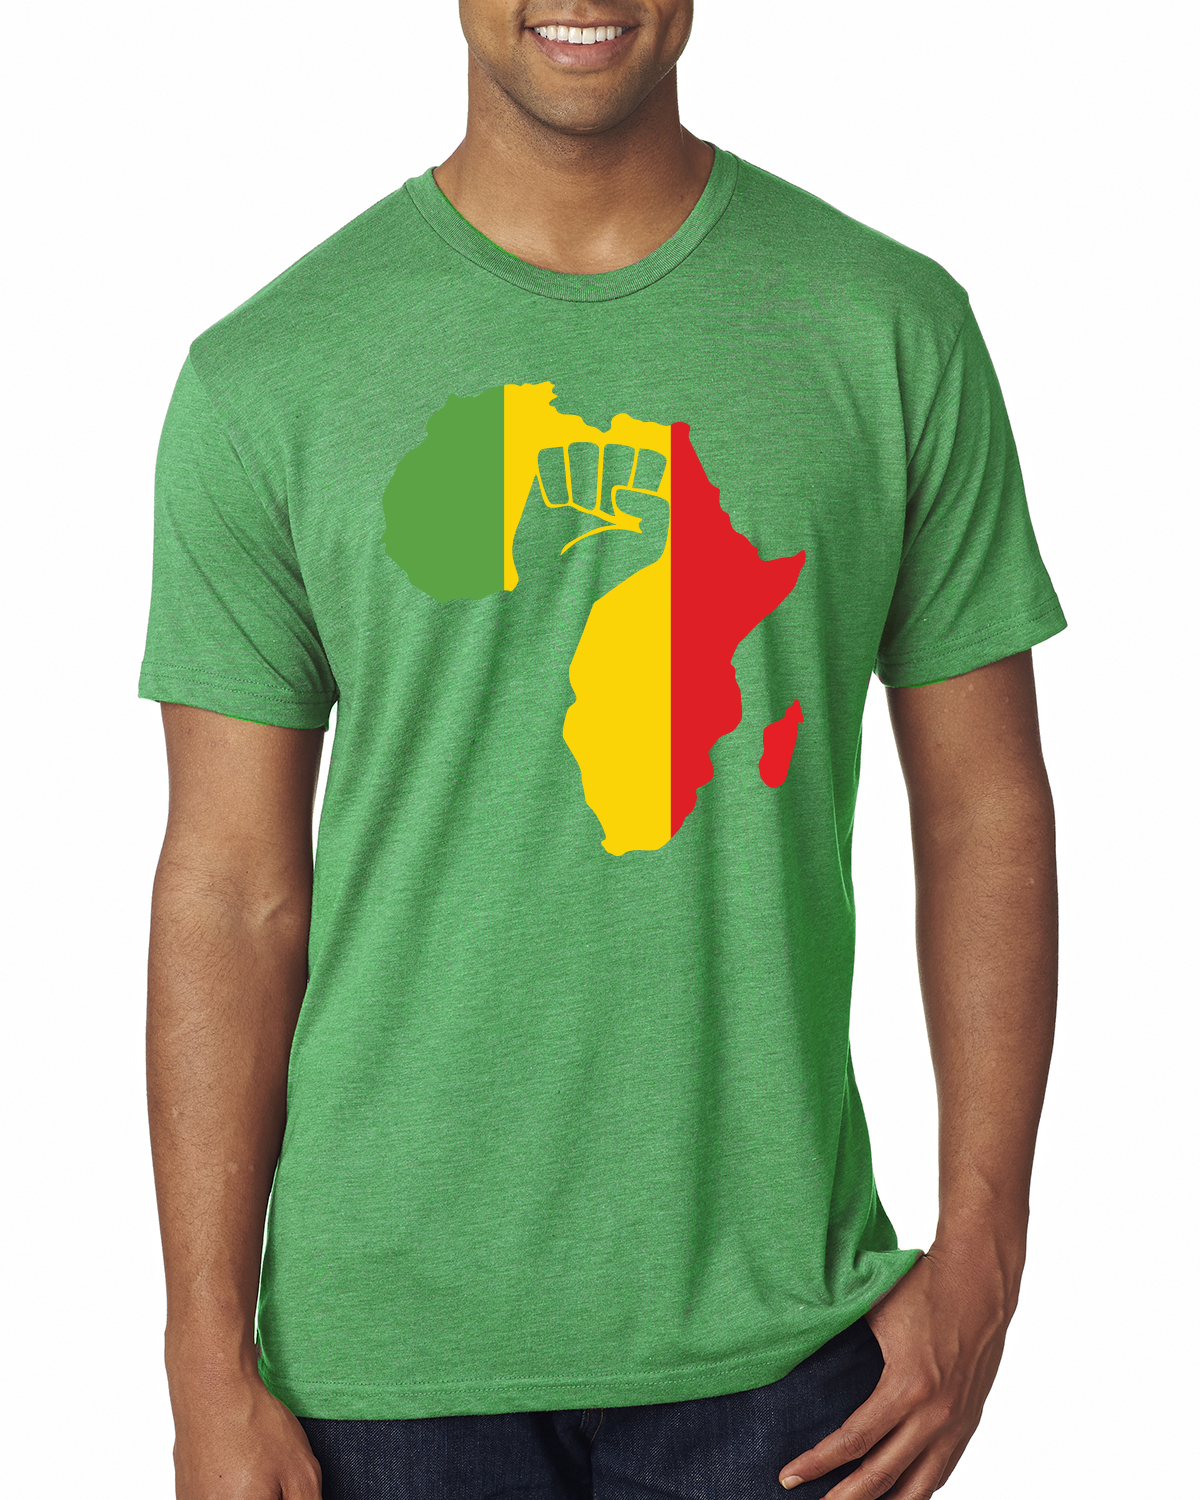 Black History Month T-shirt Map of Africa Black Pride Shirt I am Africa Map Tee